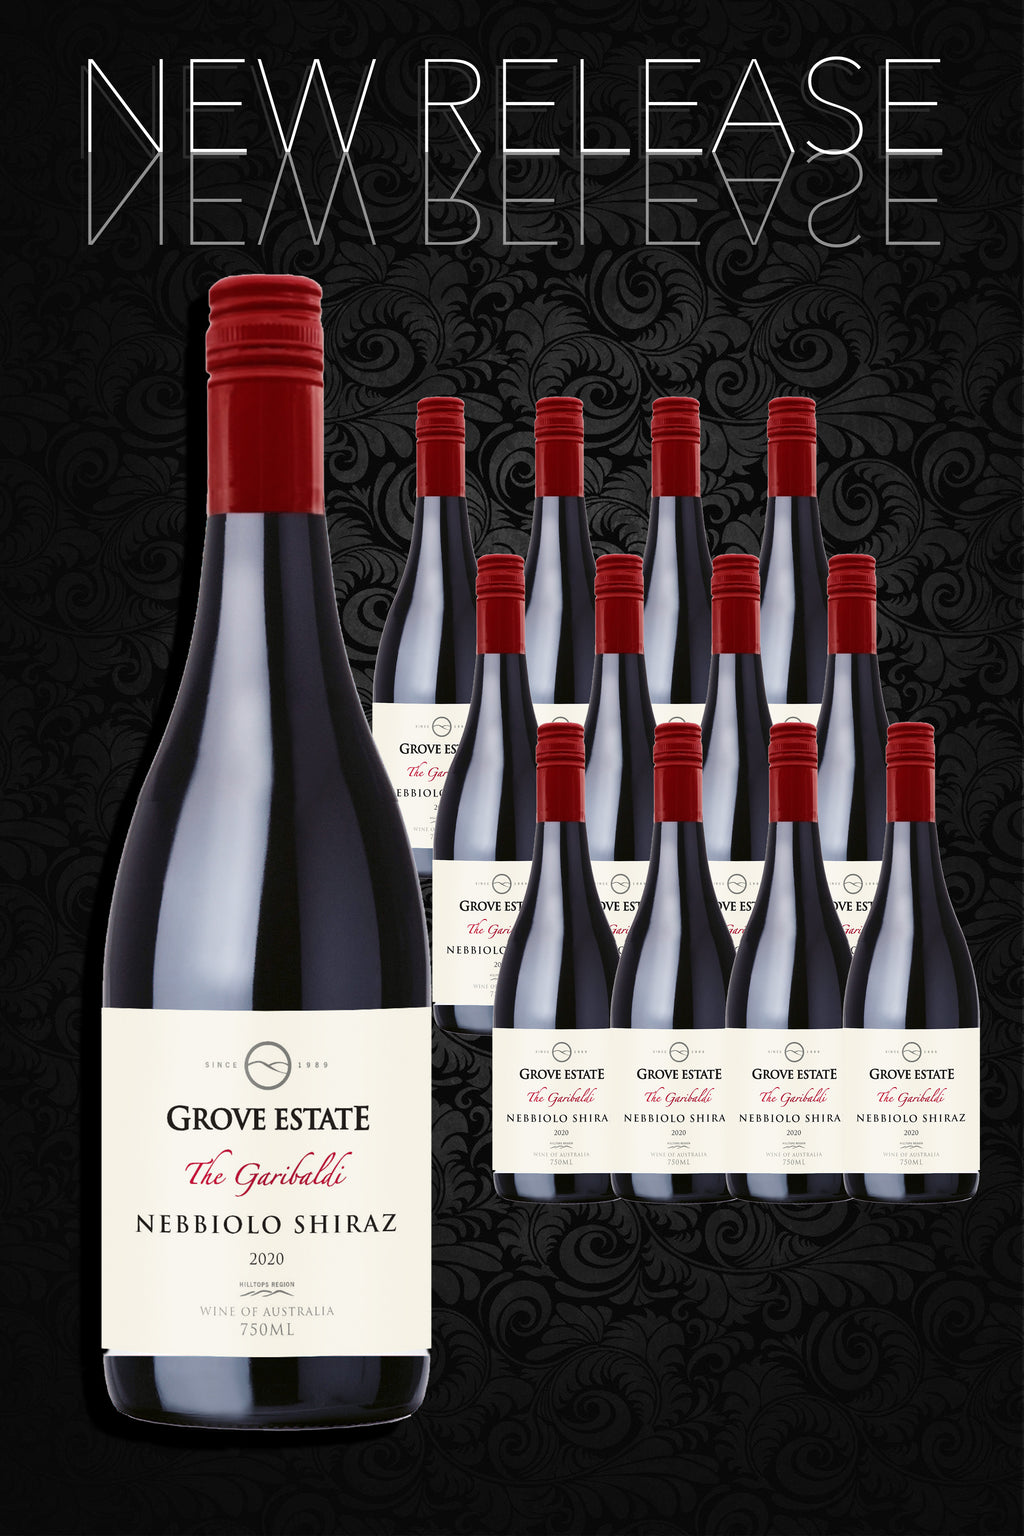 NEW RELEASE, 12 bottles of Grove Estate, The Garibaldi, Nebbiolo Shiraz 2020, $247.88 including shipping (NSW/VIC/ACT/QLD)